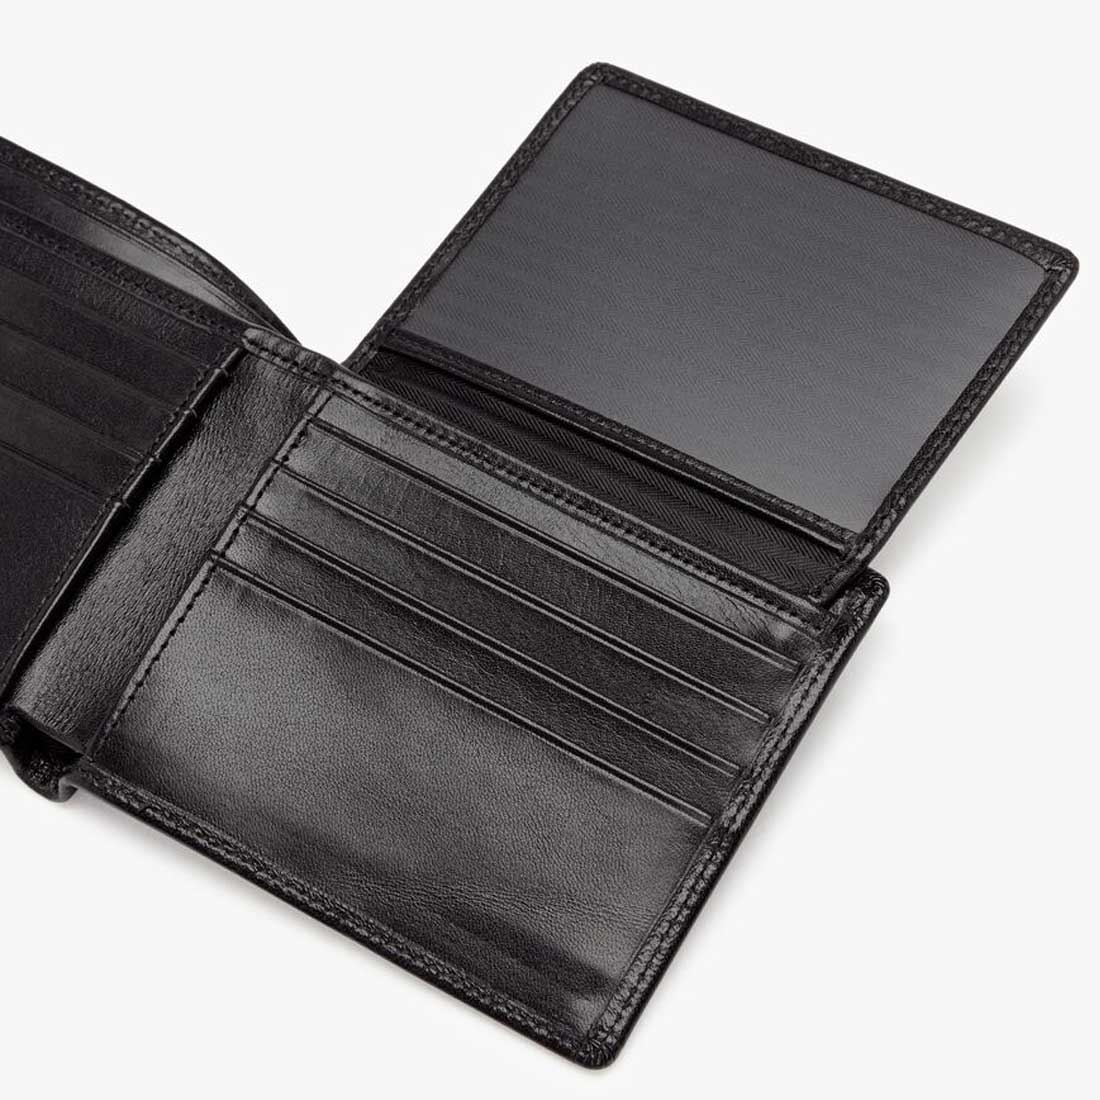 RM WILLIAMS Tri Fold Wallet - Mens Yearling Leather - Black